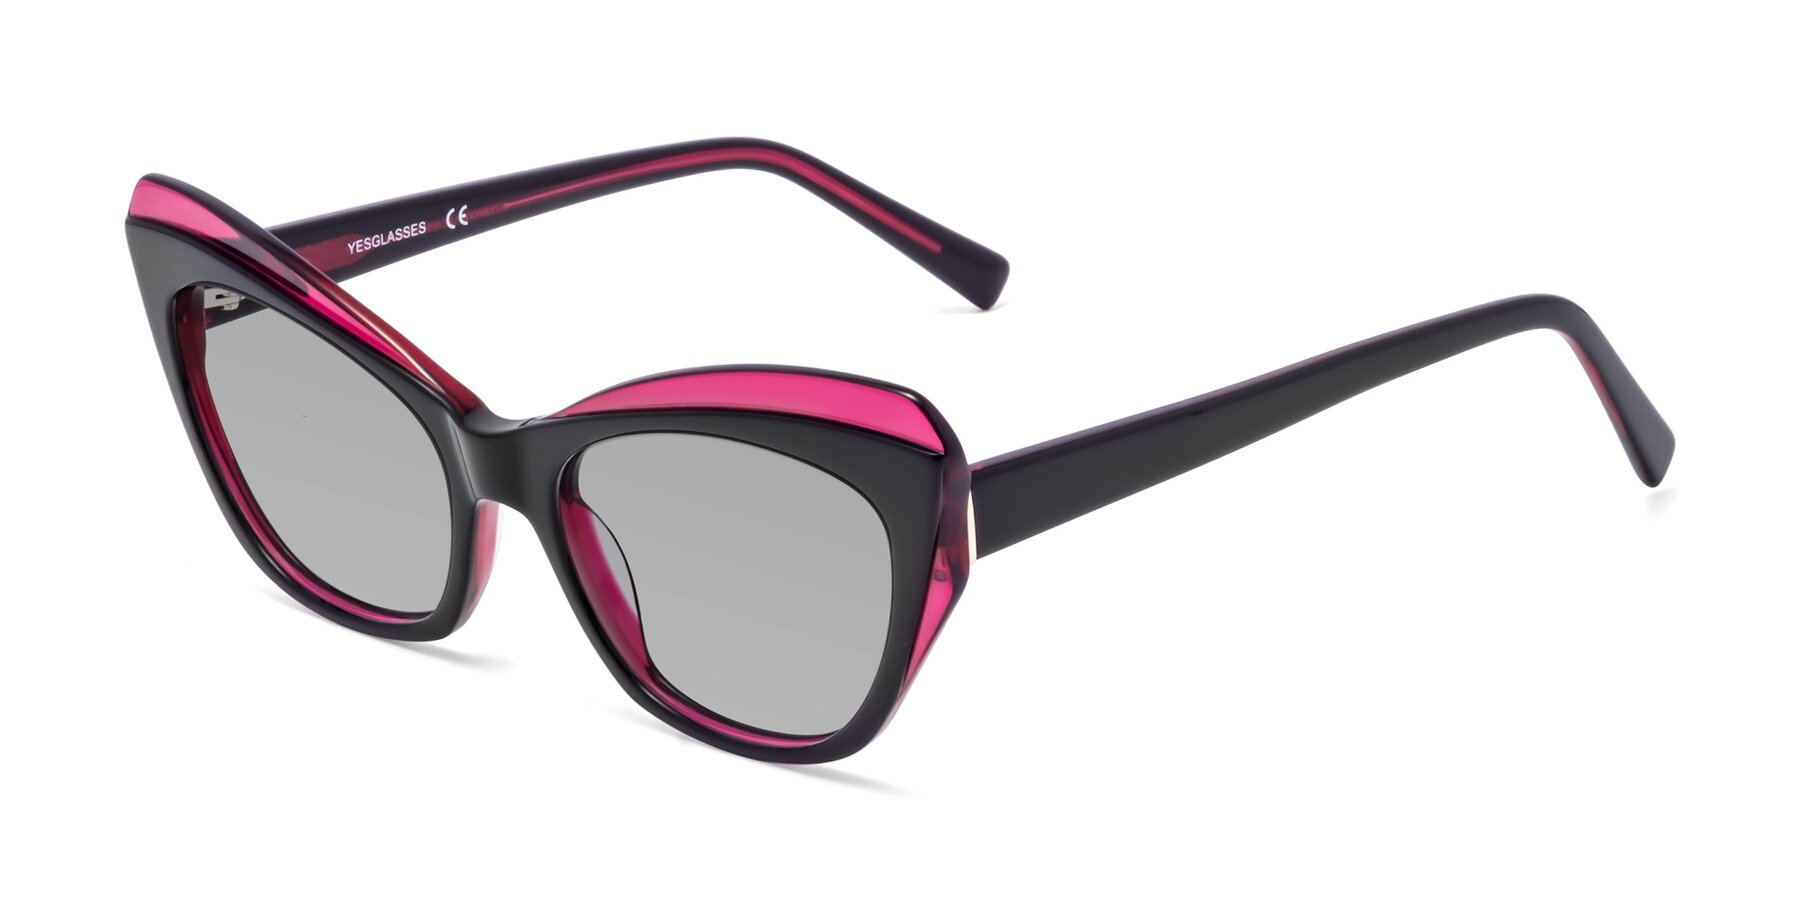 Angle of 1469 in Black-Plum with Light Gray Tinted Lenses